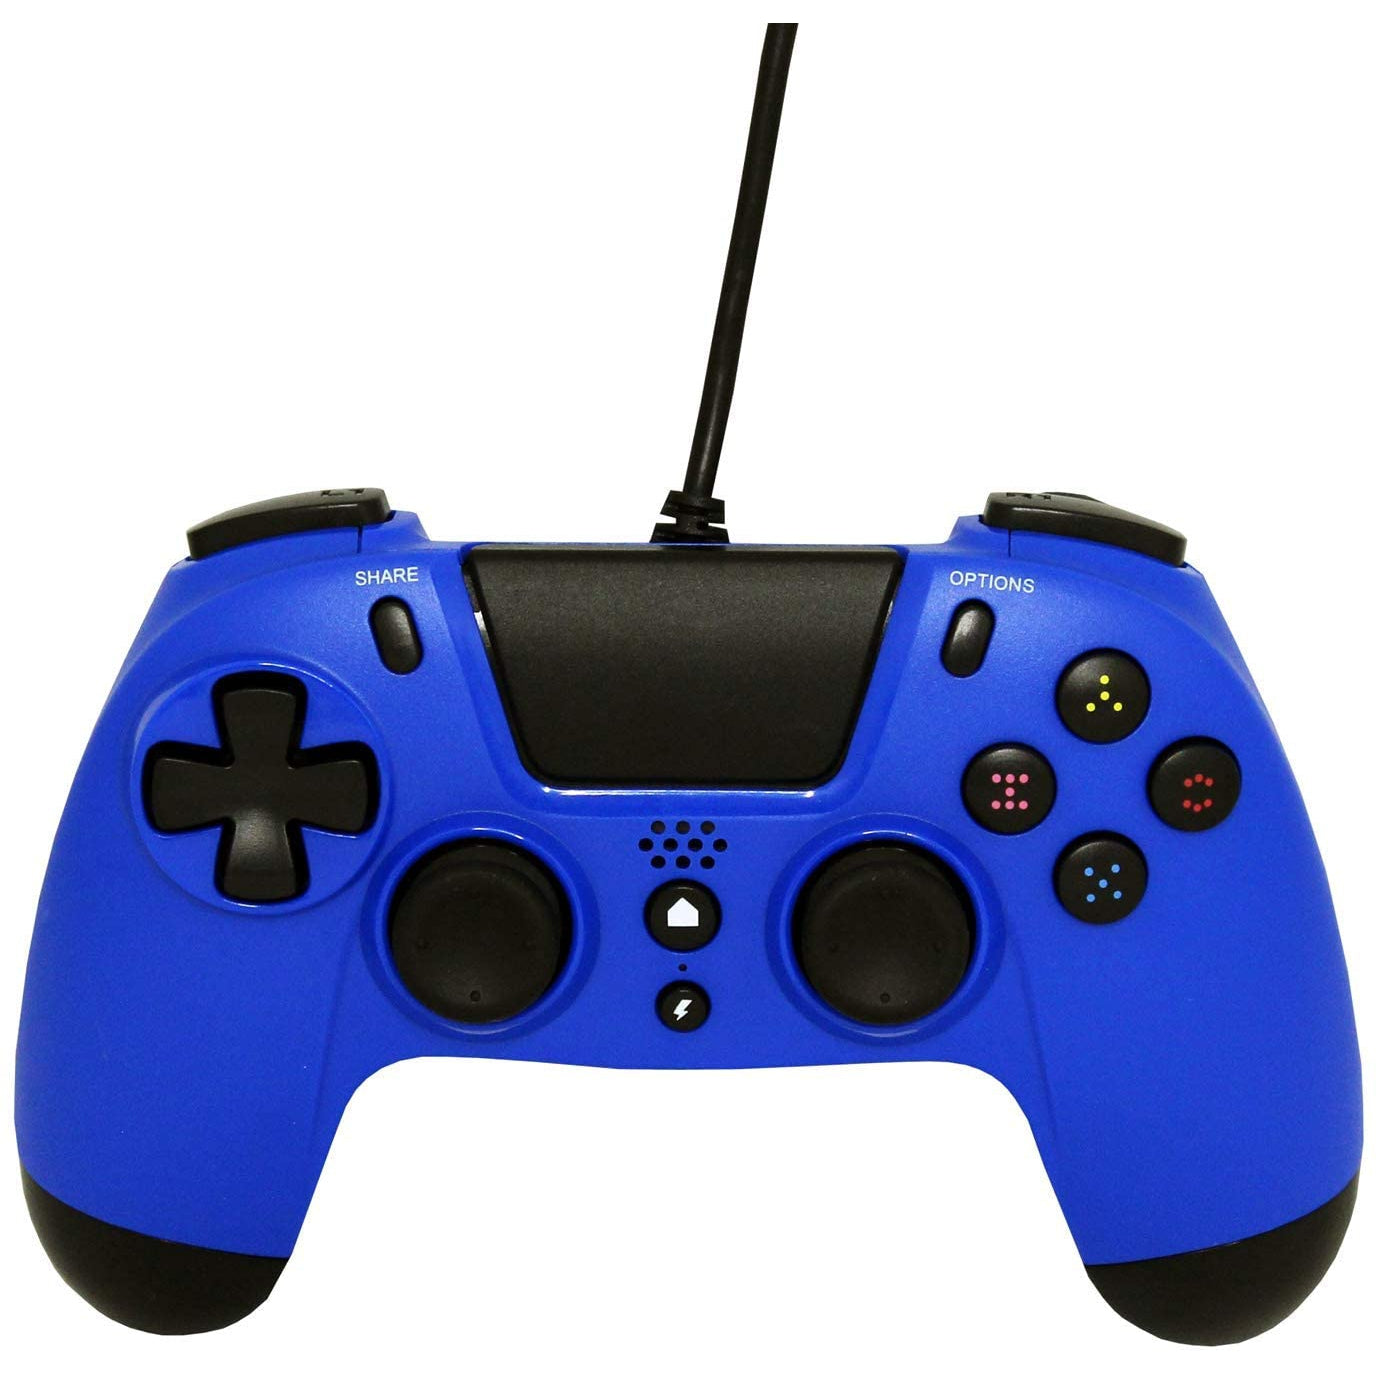 Gioteck VX-4 Wired Controller for PlayStation 4 - Blue - Pristine